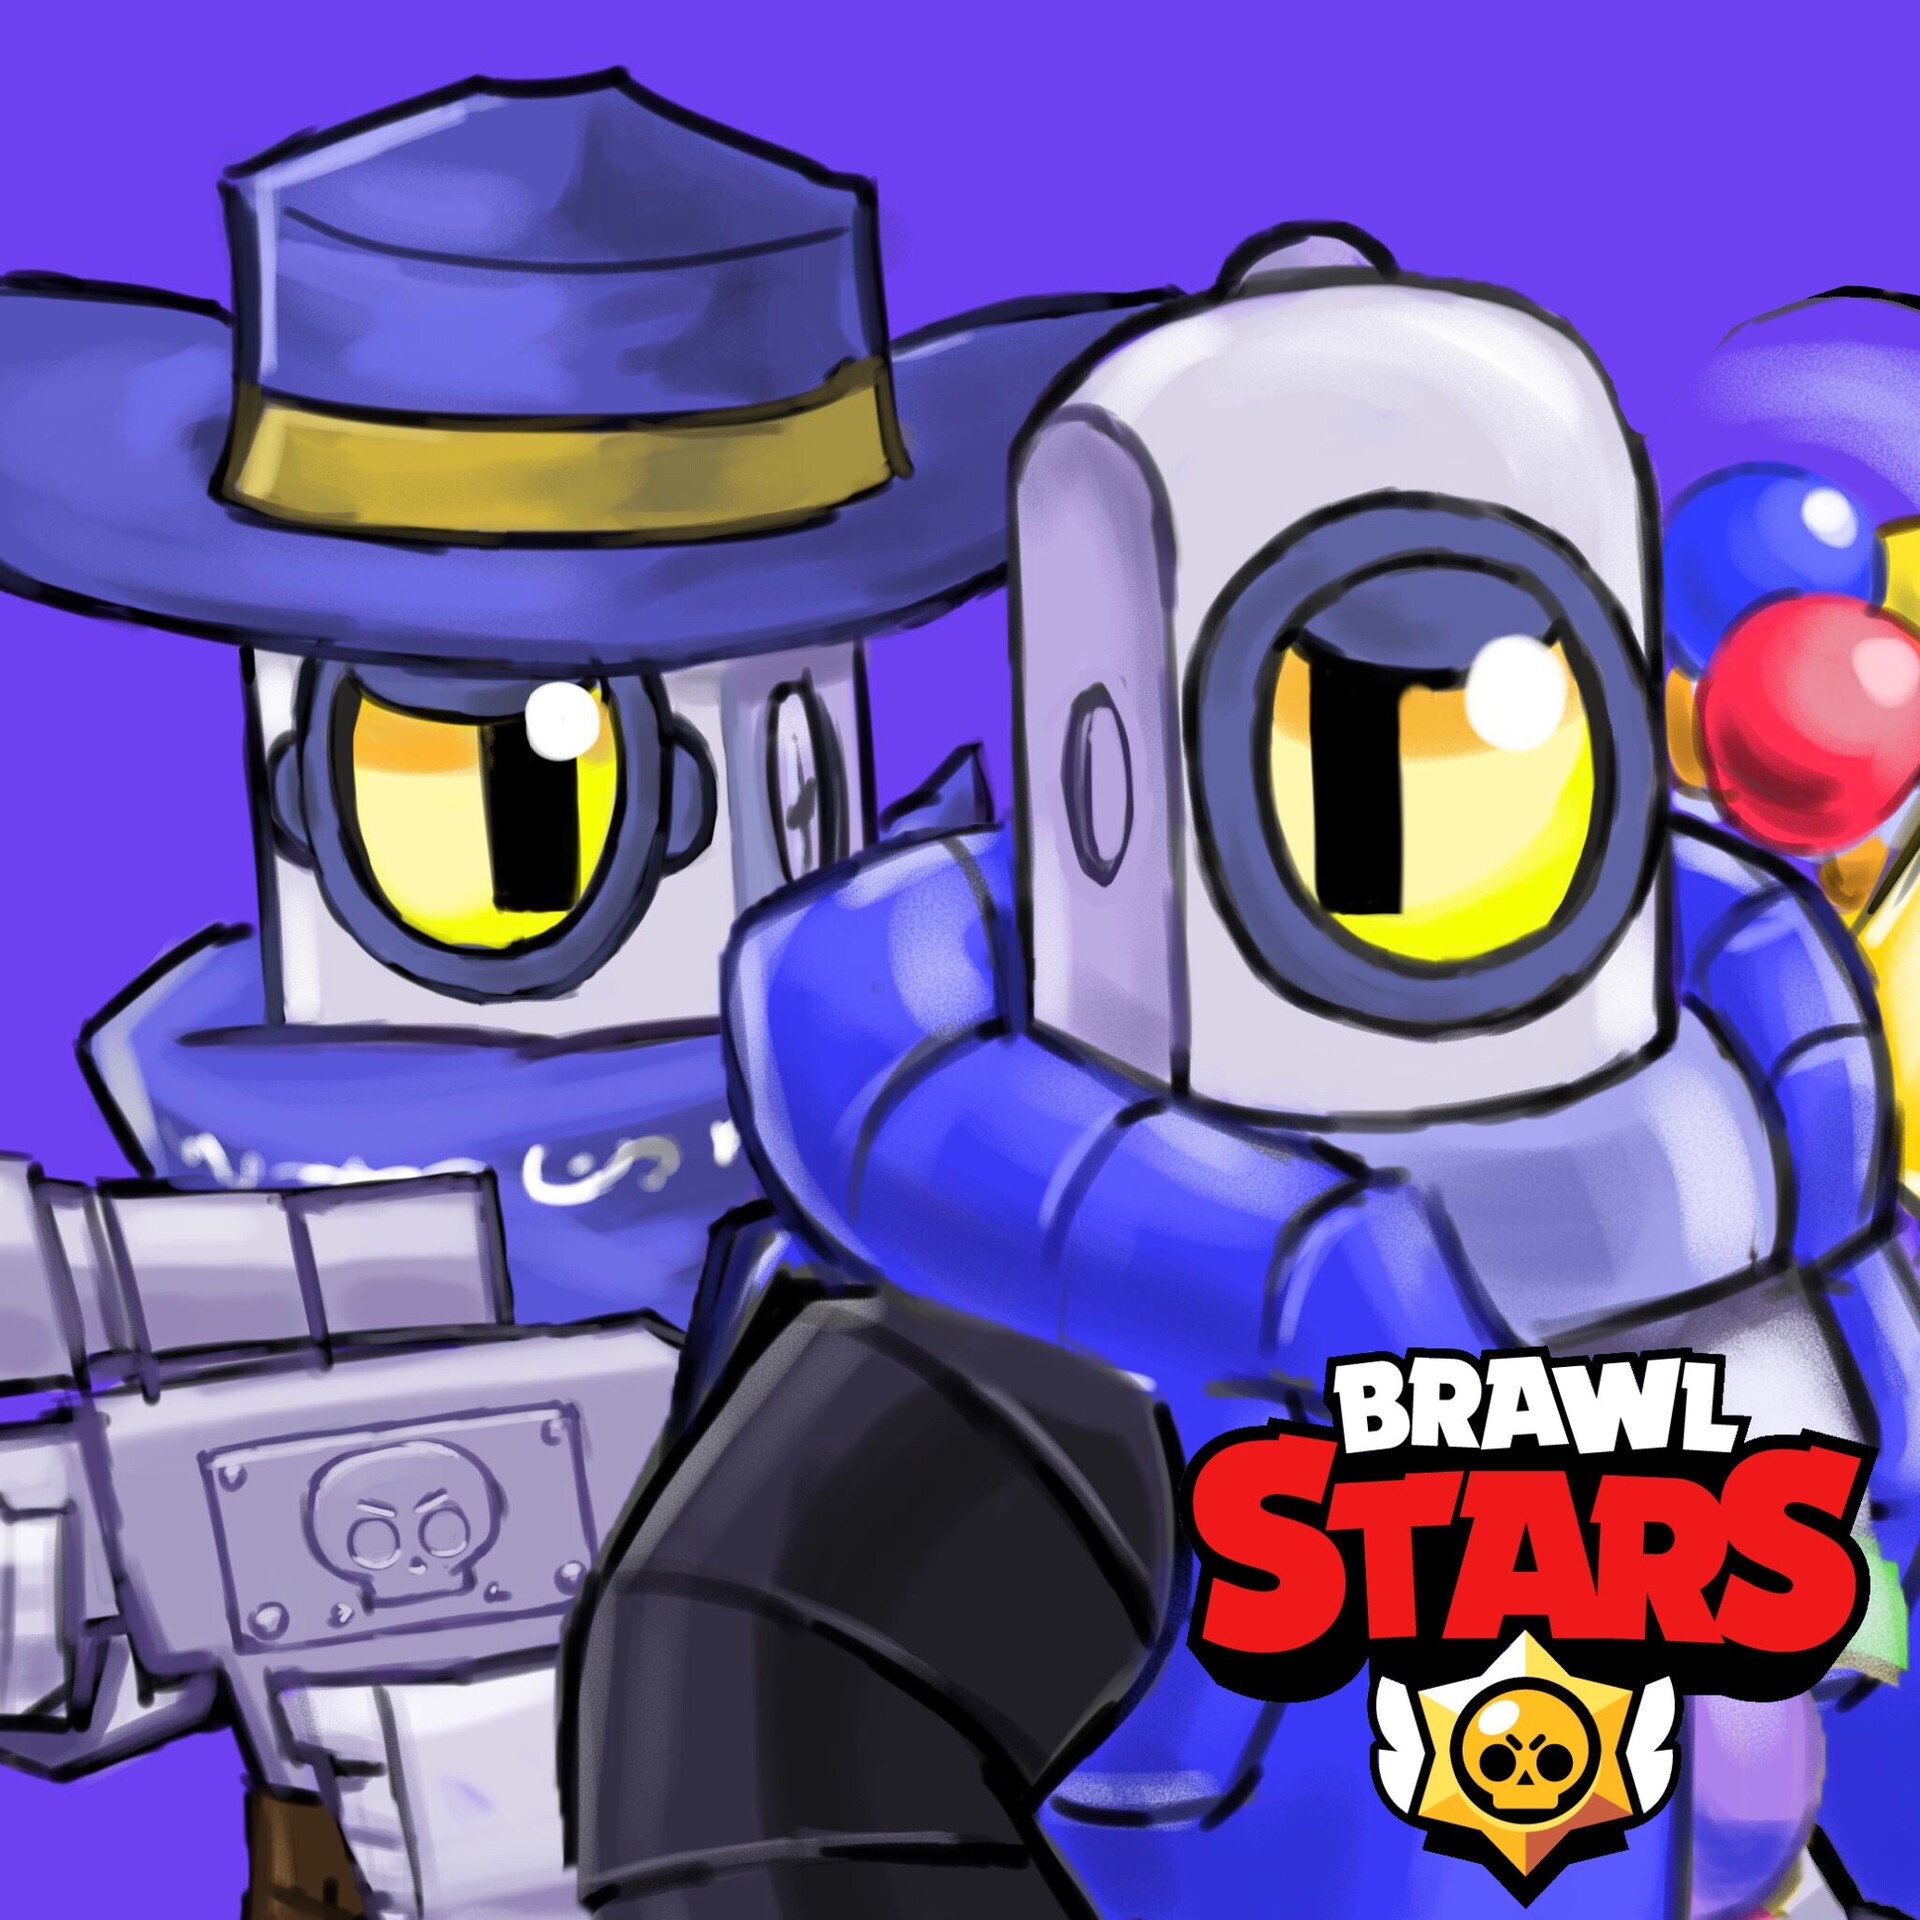 20 Top Pictures Brawl Stars Animation Ricochet Tried To Draw Piper Bot And Human Ricochet In The Brawls Stars Style Brawlstars Kevinyesse2 - brawl stars fes 2021